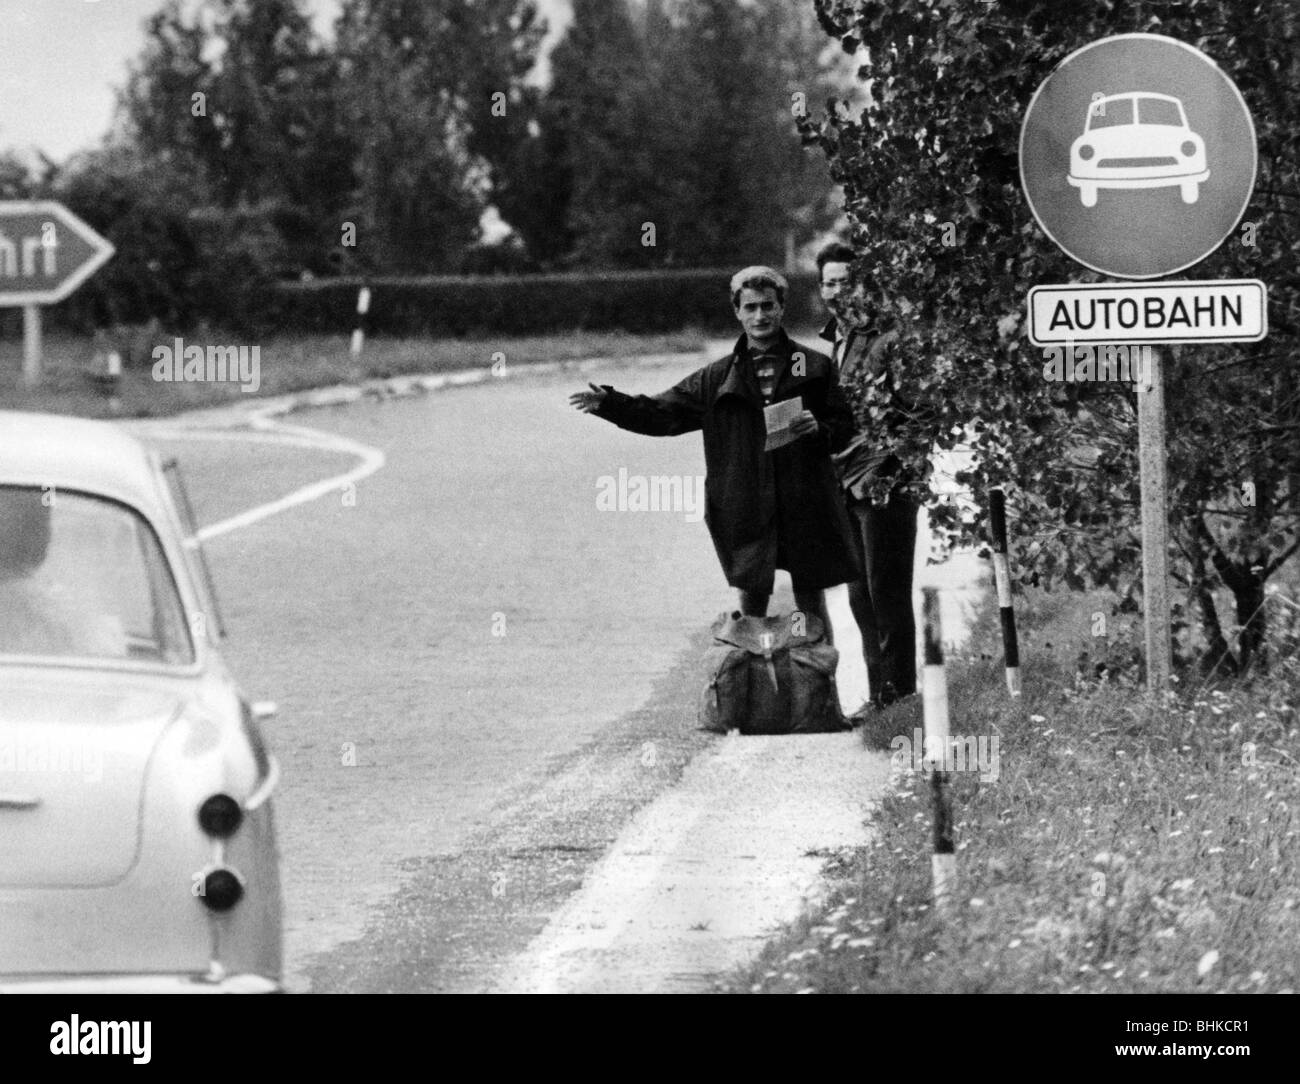 transport / transportation, street, hitch-hiking, backpacking, hitchhiker on a motorway (autobahn) driveway, Germany, 1960s, Stock Photo